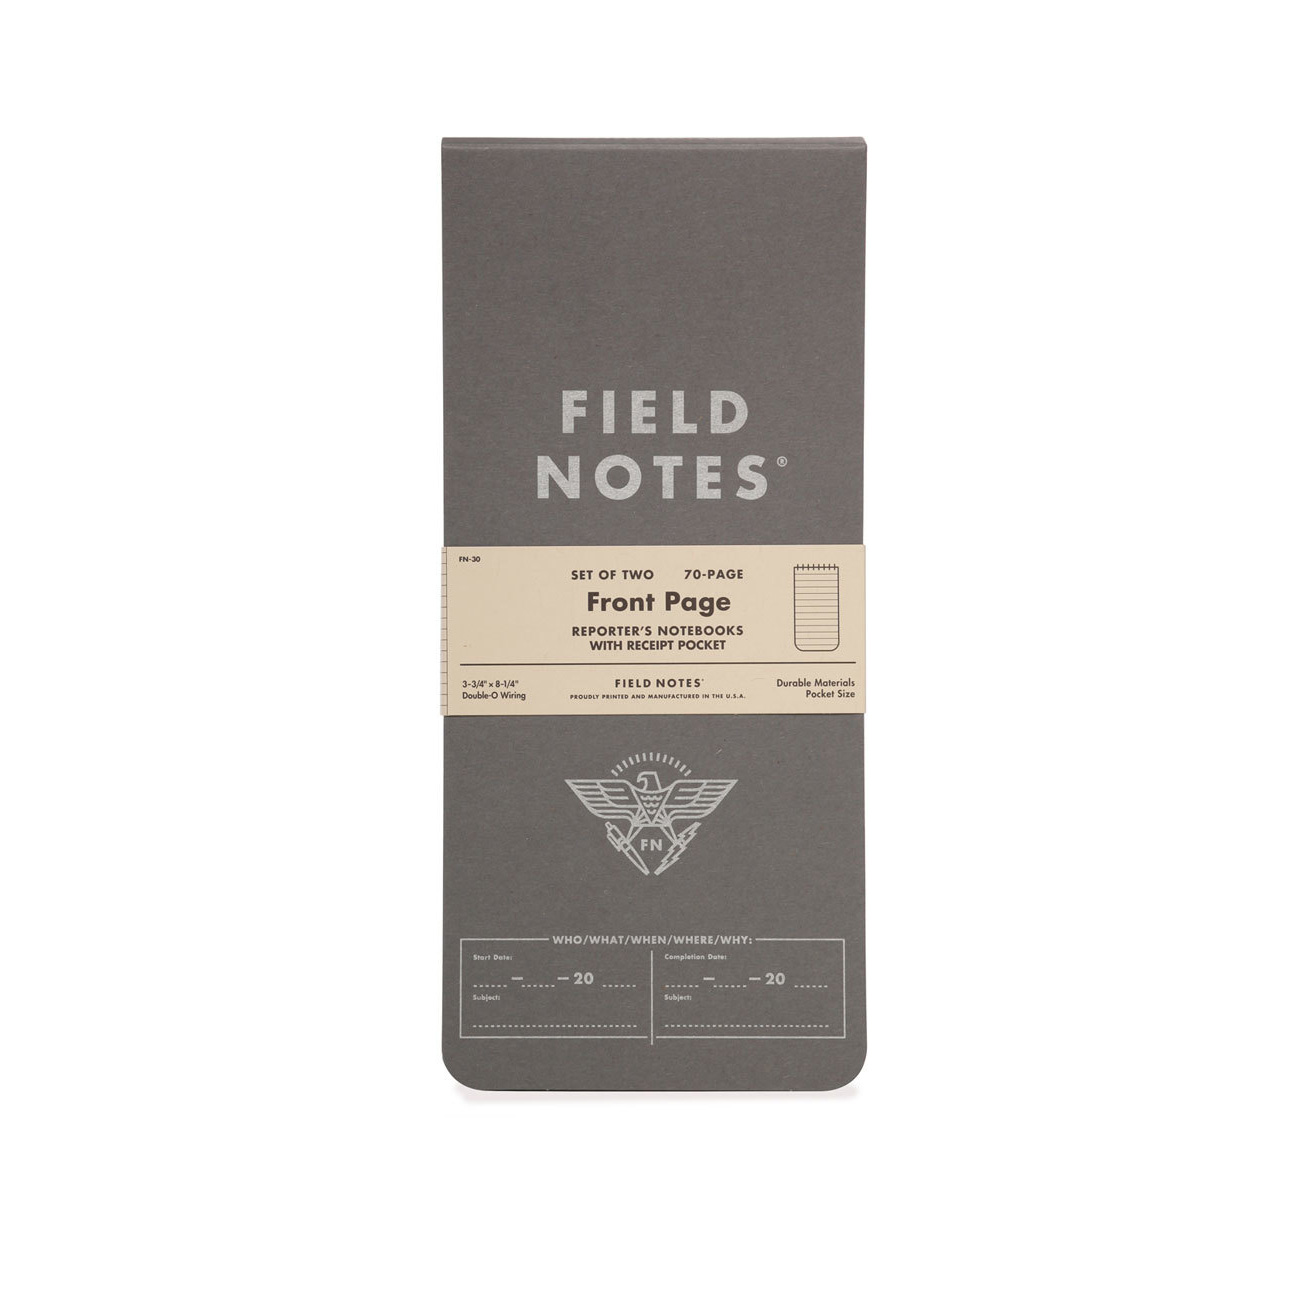 FIELD NOTES – FRONT PAGE